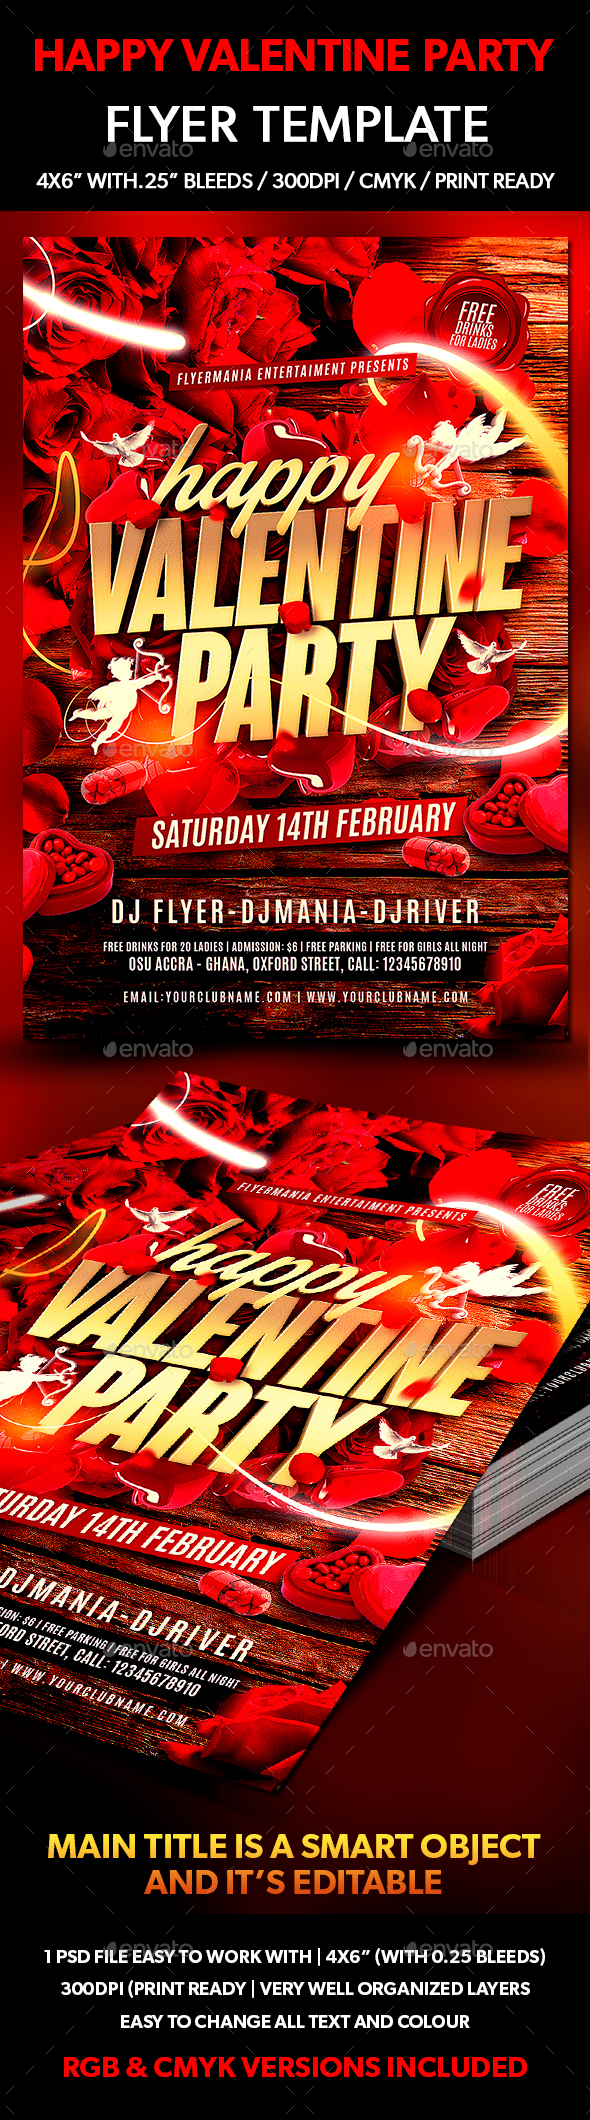 Happy Valentine Party Flyer Template